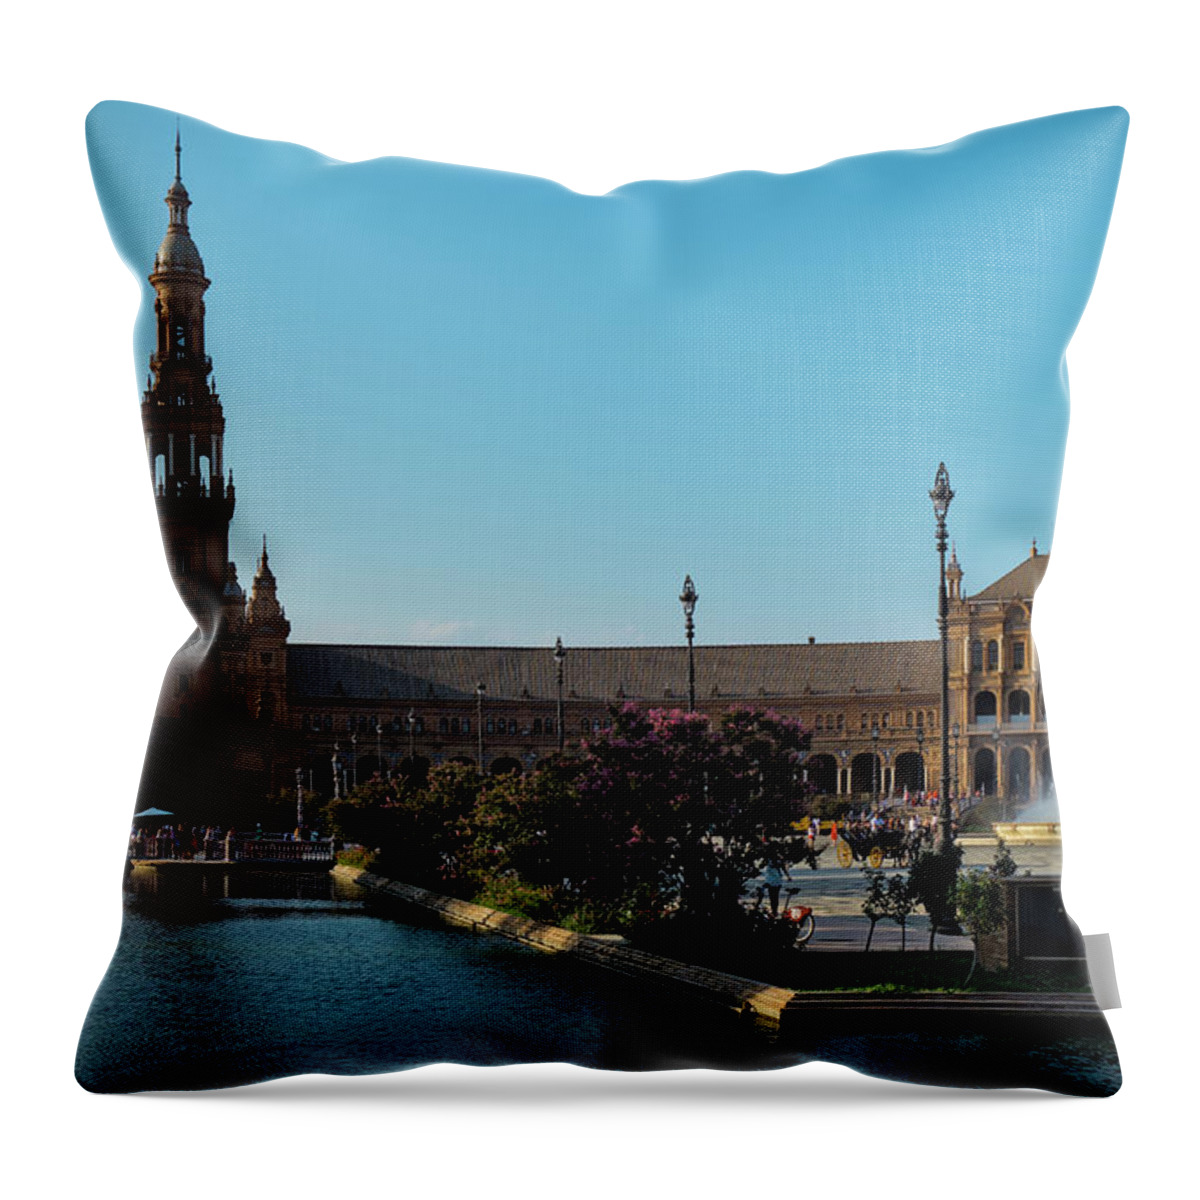 Spain Square Throw Pillow featuring the photograph Spain Square in Seville by Angelo DeVal